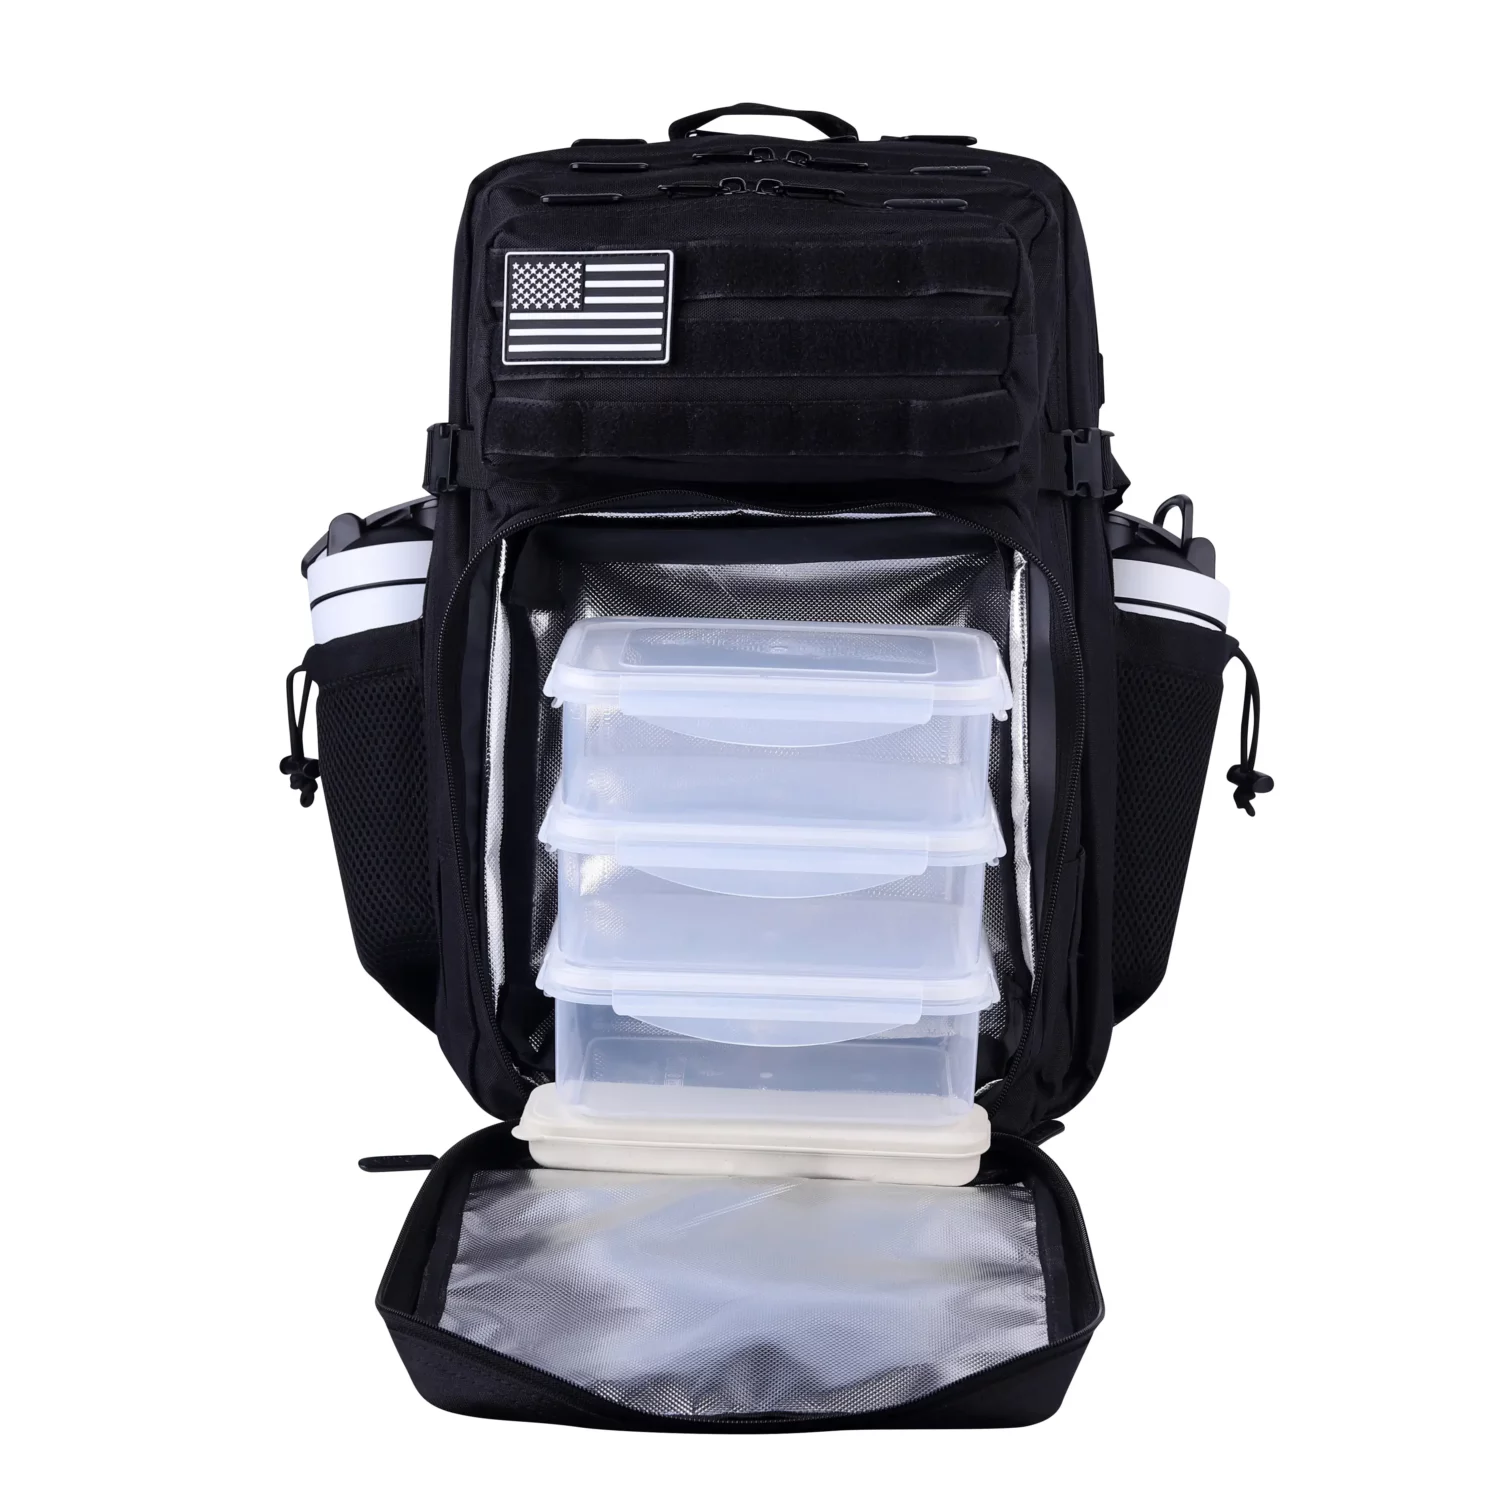 A meal bag that can accommodate three lunch boxes